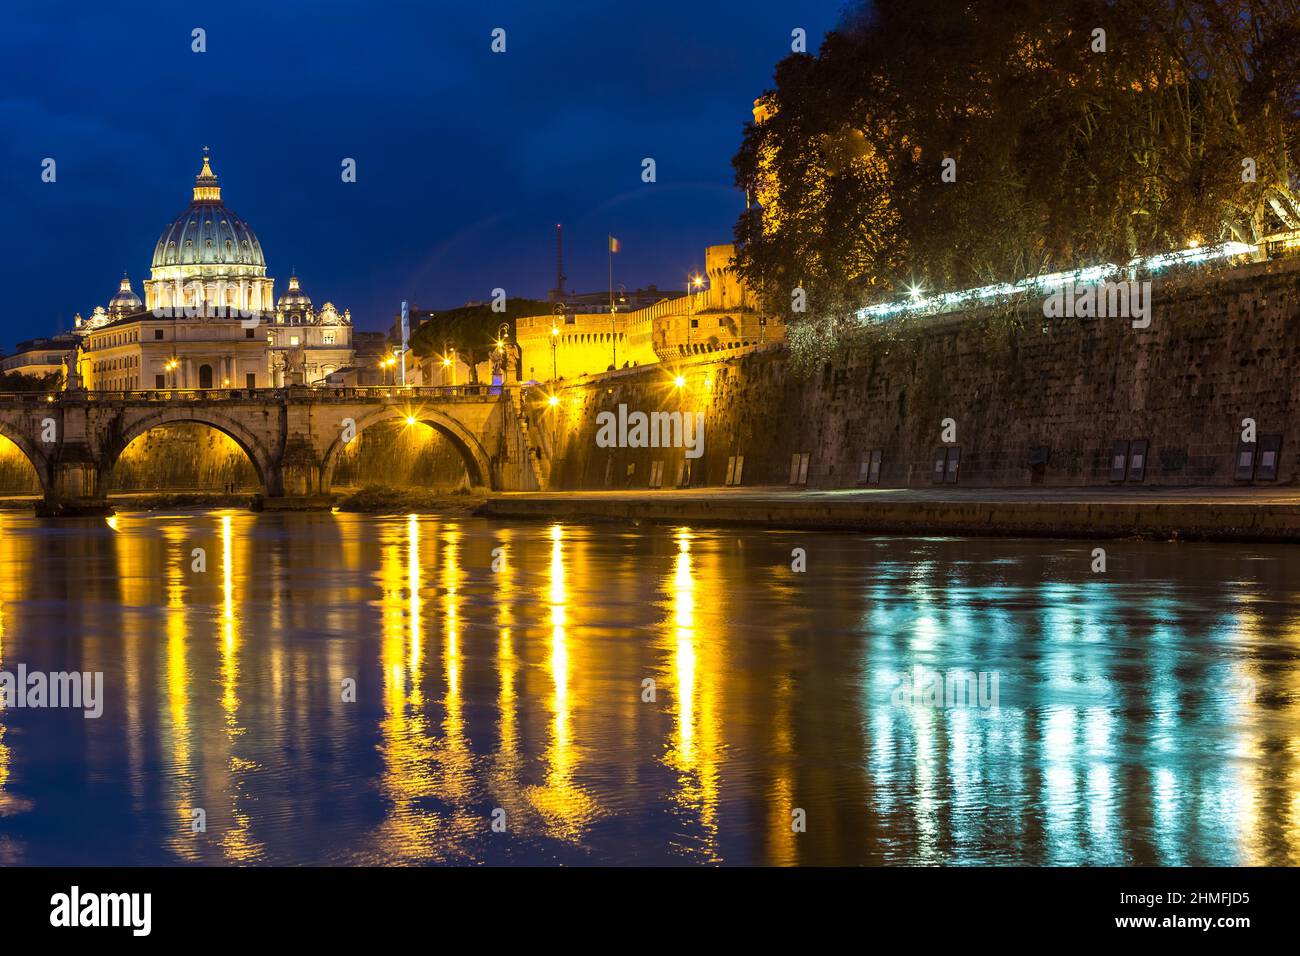 Angelo Bridge and St. Peter's Basilica at dusk, Rome, Italy Stock Photo